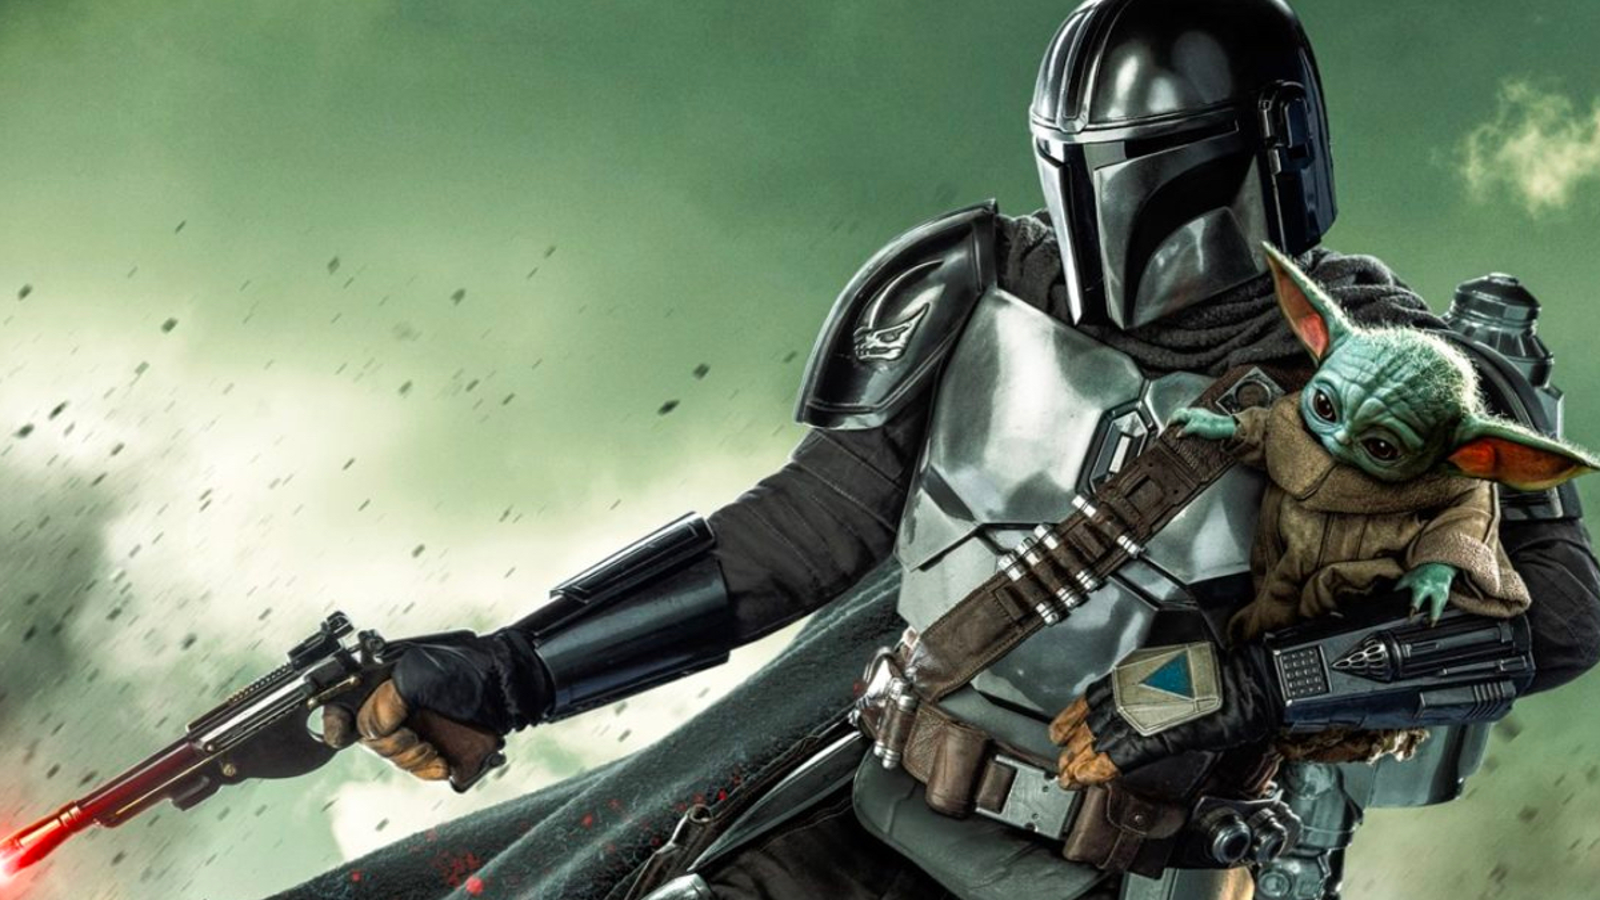 Star Wars: From Skeleton Crew to Mandalorian & Grogu, here's what's coming  up in terms of new movies and shows